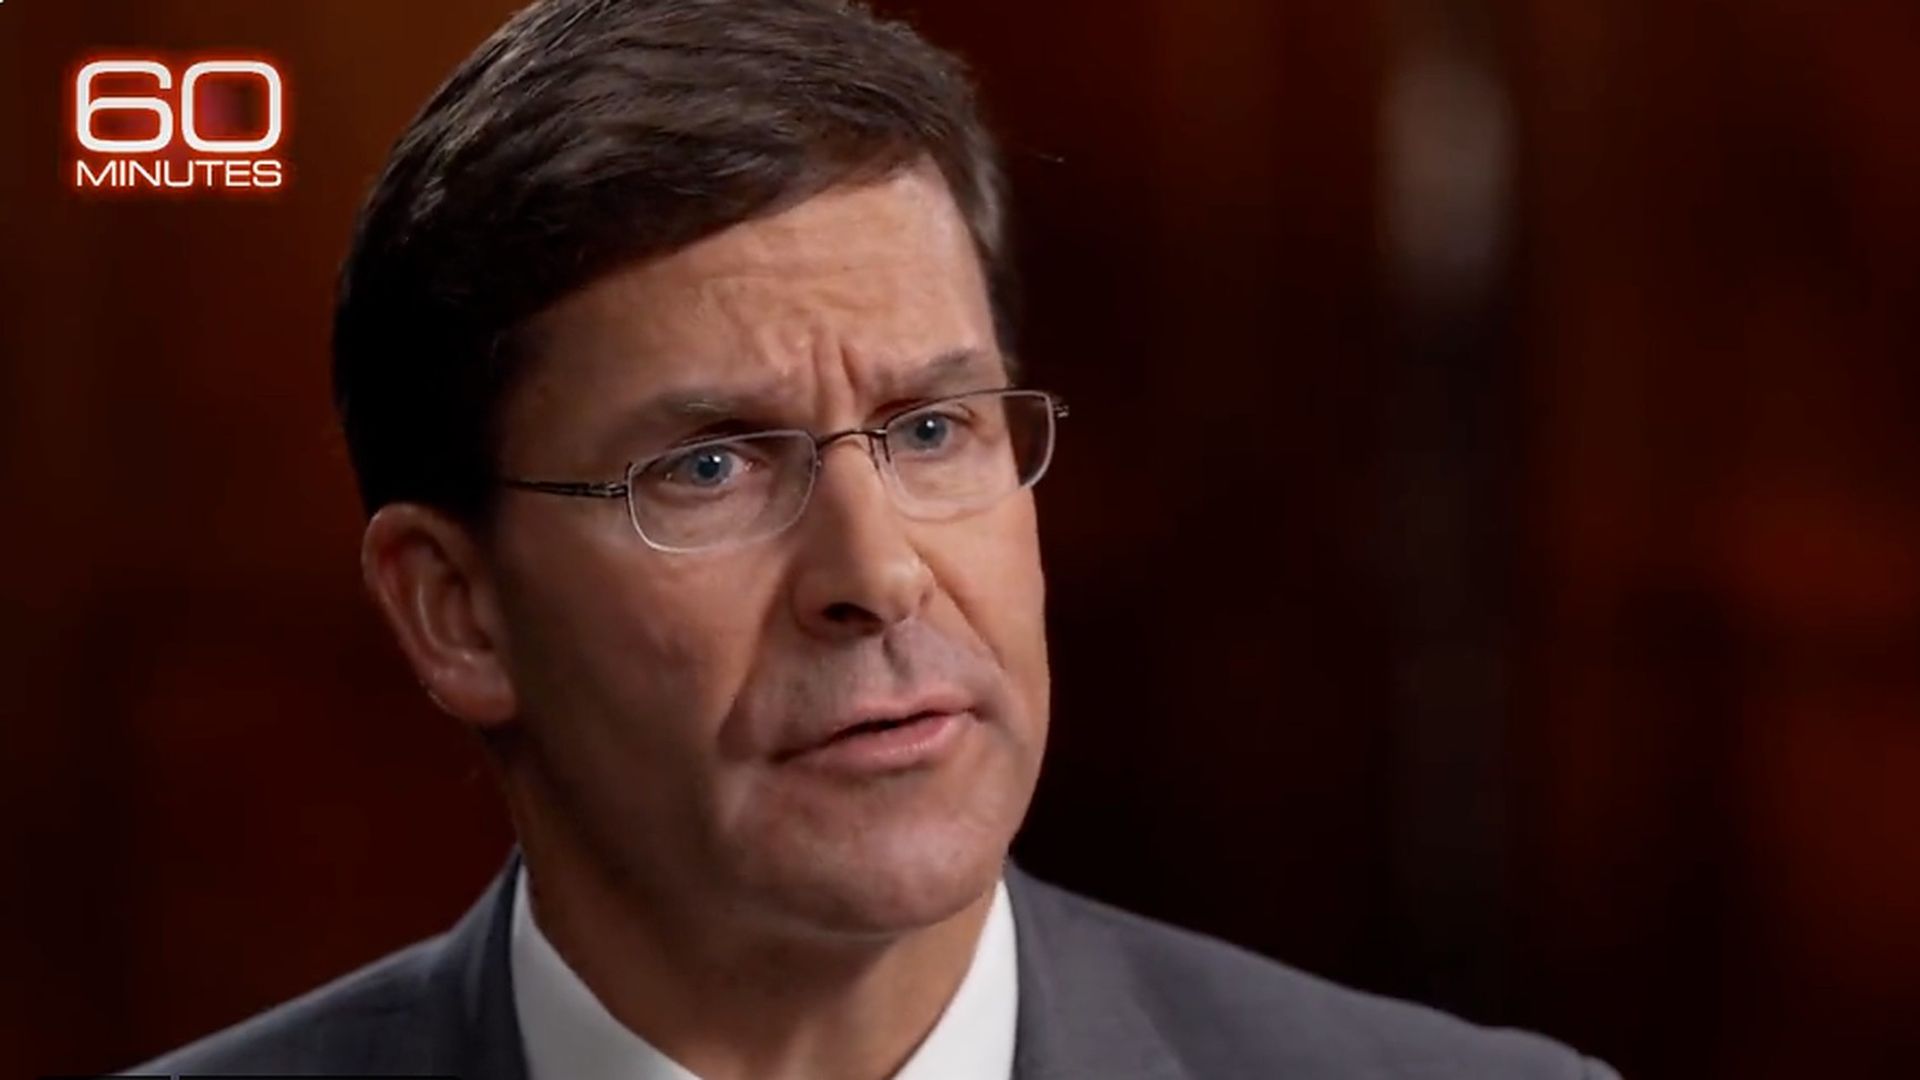 A screenshot of former U.S. Secretary of Defense Mark Esper during his interview on CBS' "60 Minutes," broadcast on Sunday.